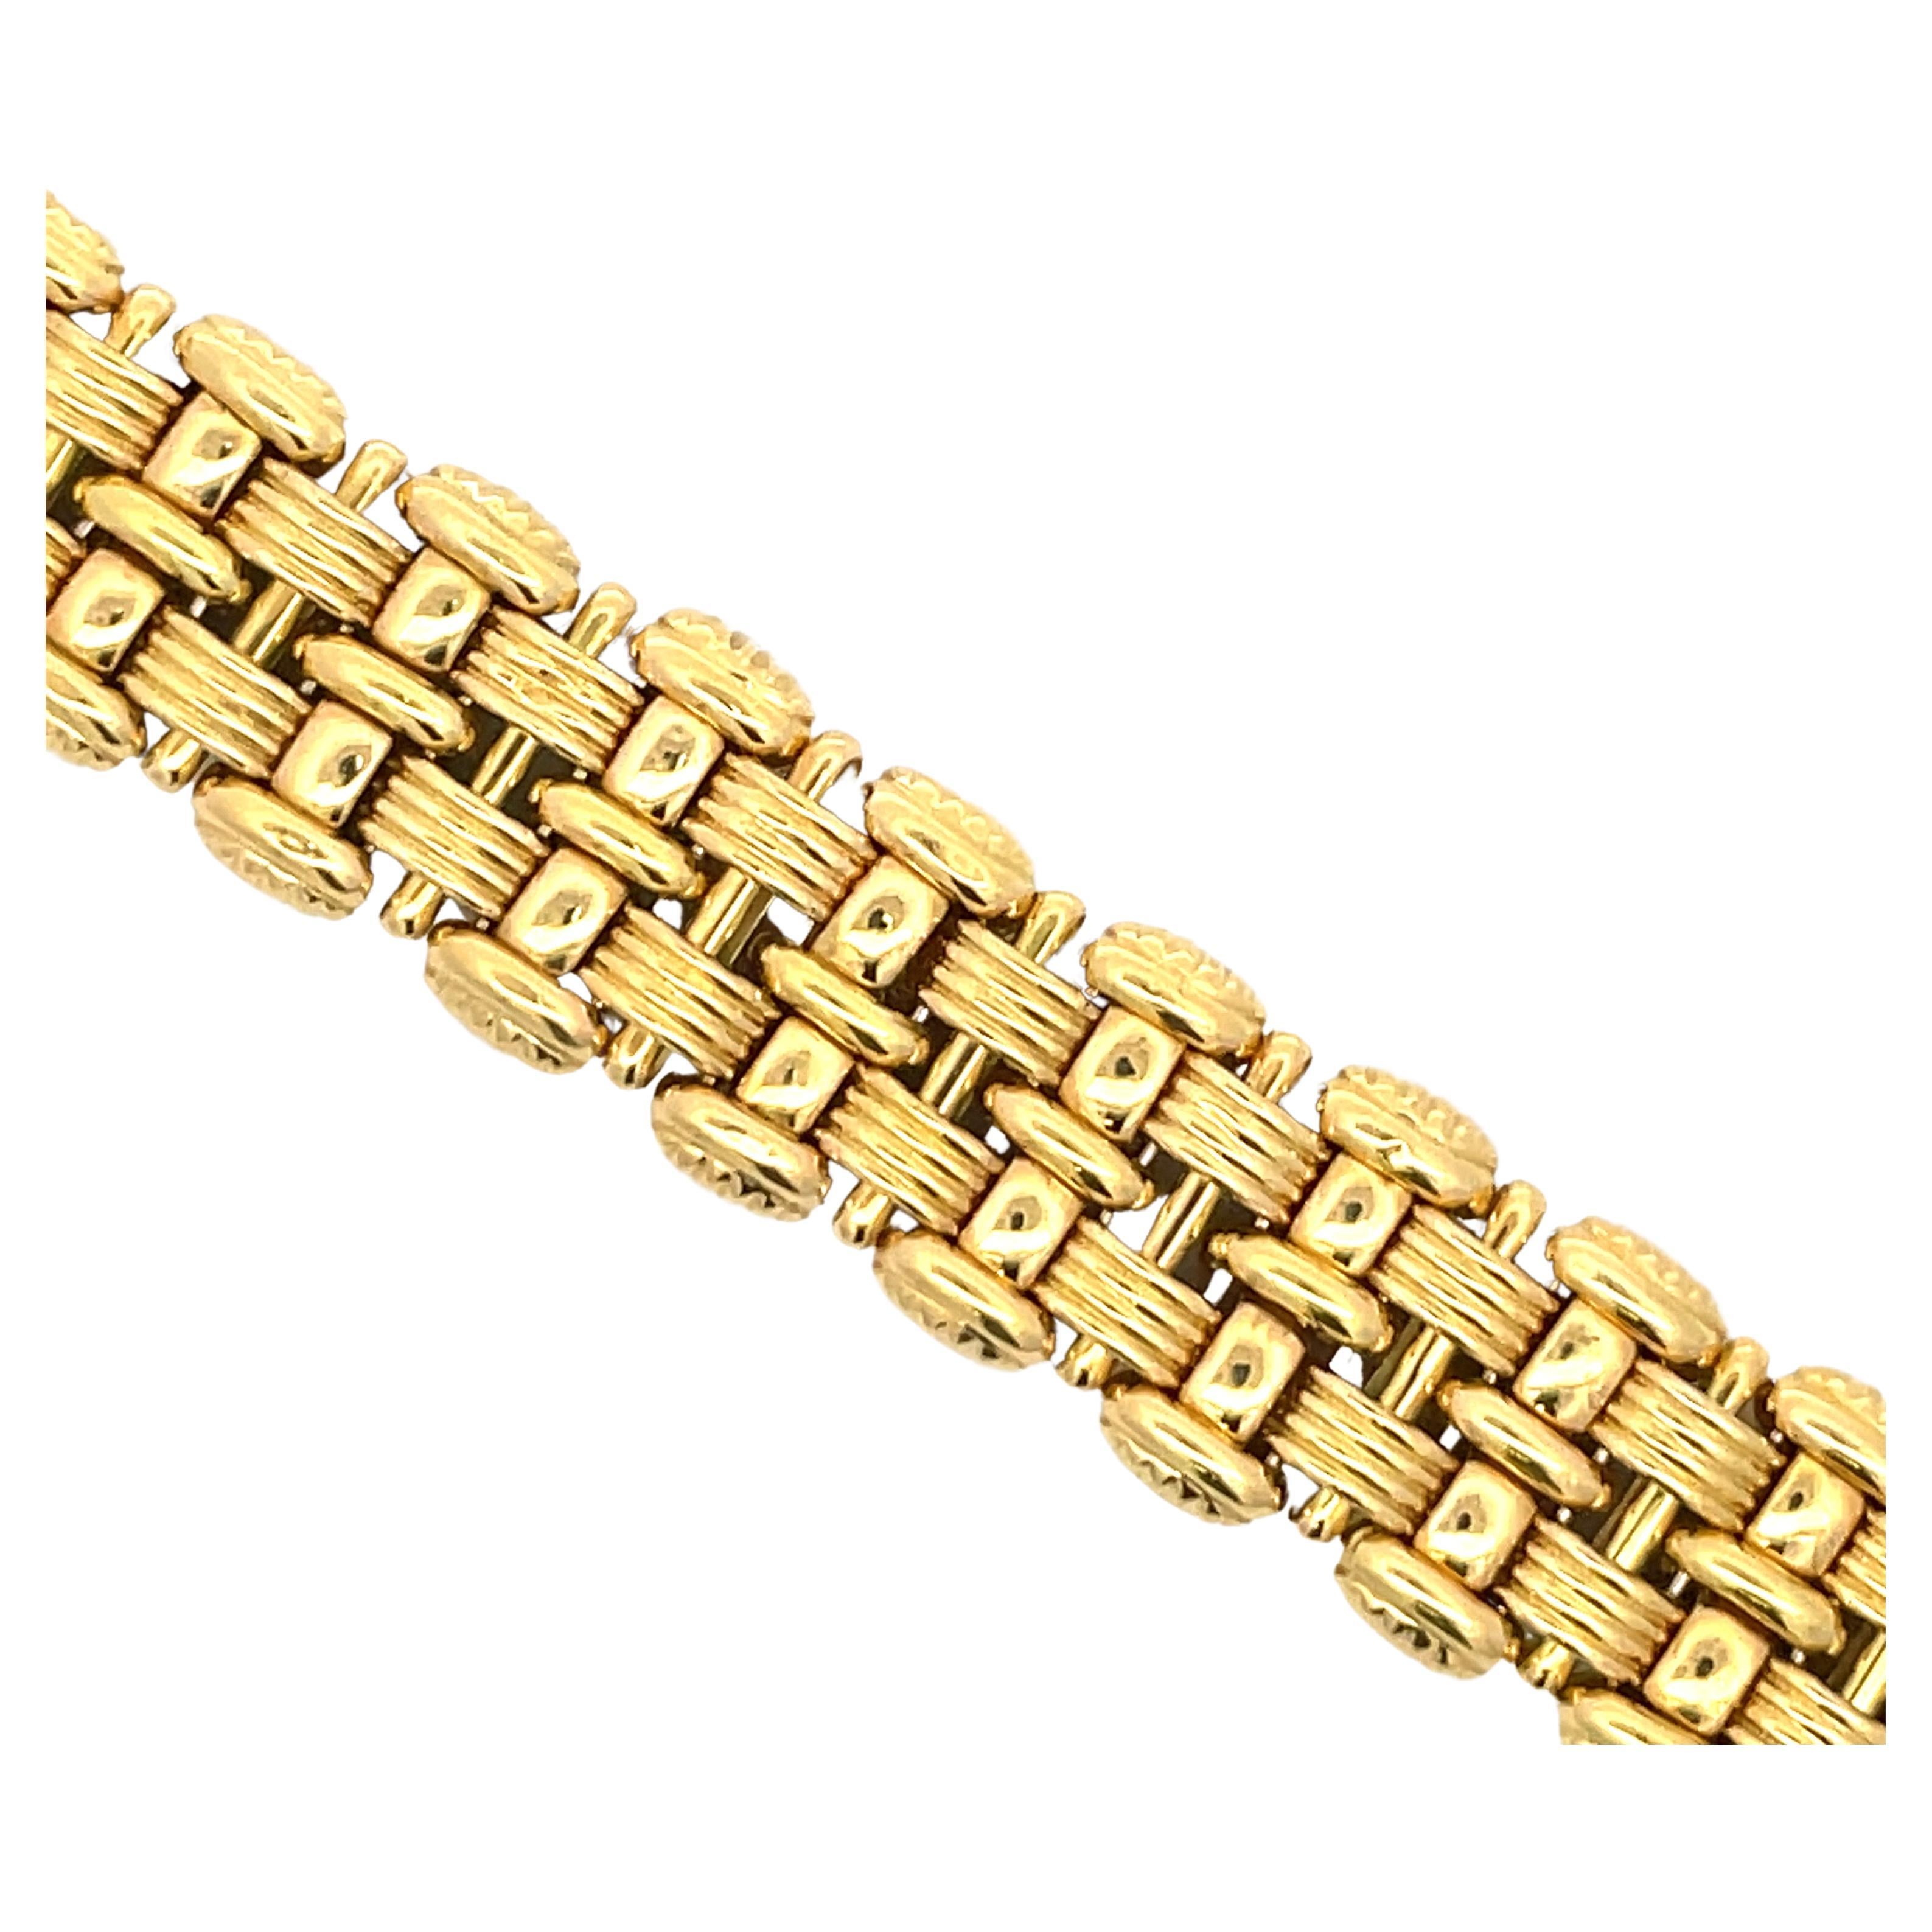 18 Karat Yellow Gold bracelet featuring a woven motif design weighing 47.1 grams, made in Italy.
Stamped Italy 18k 
Designer OTC

More gold bracelets available.
Search Harbor Diamonds 